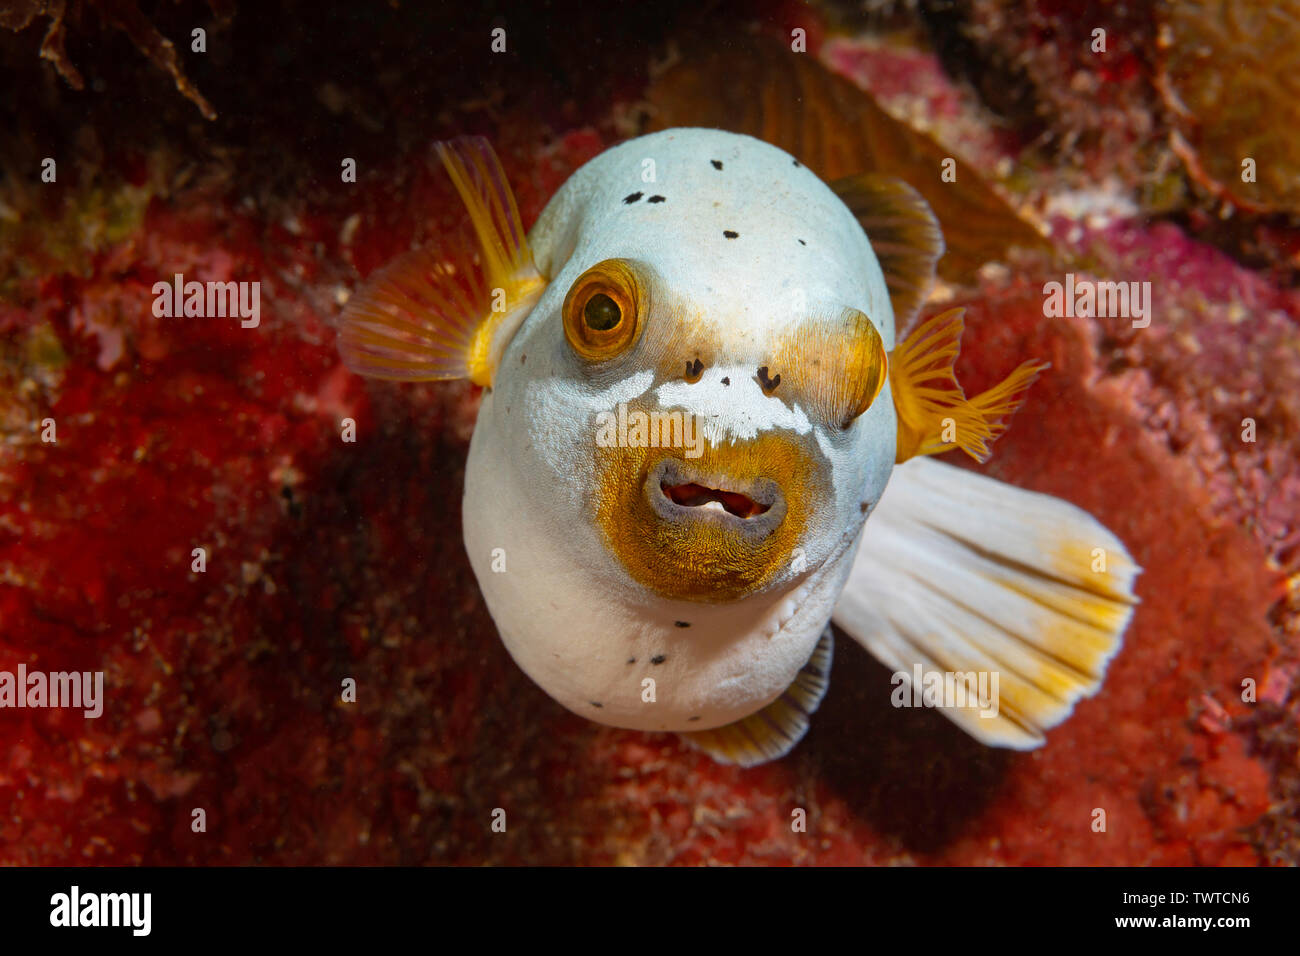 Blackspotted puffer or dog-faced puffer, Arothron nigropunctatus, with swollen stomach after heavy meal, Yap, Federated States of Micronesia. Stock Photo